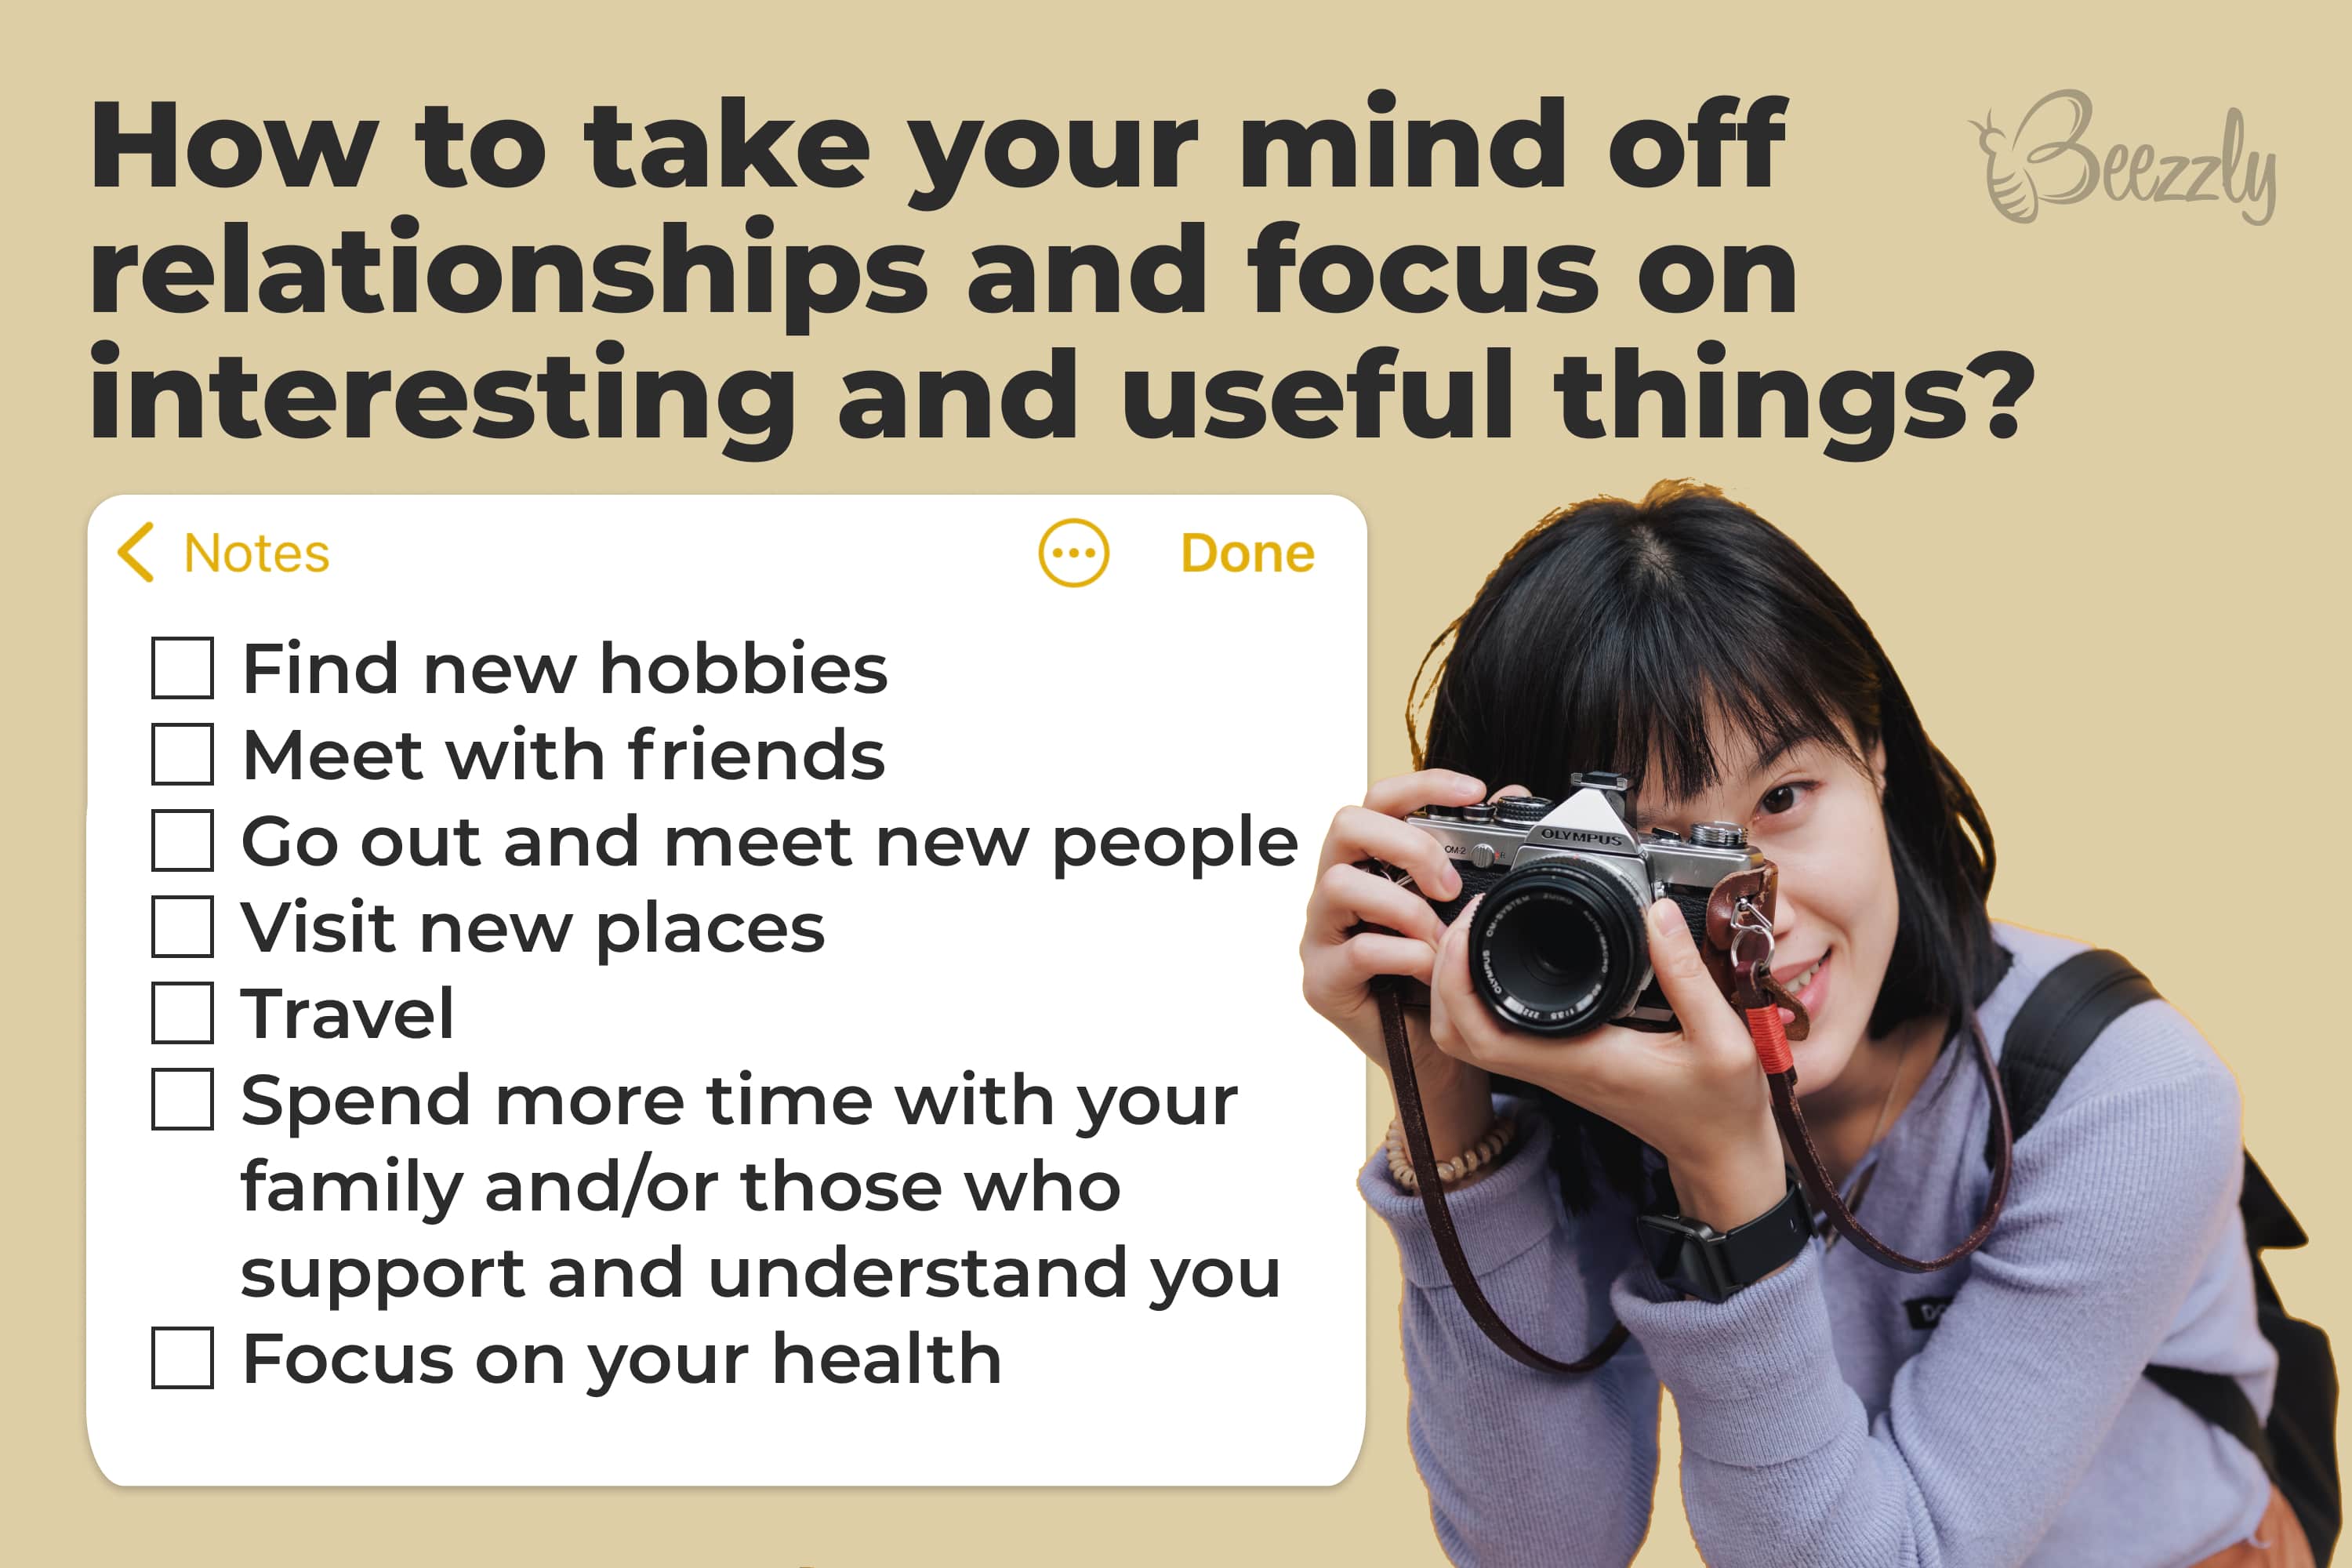 How to take your mind off relationships and focus on interesting and useful things